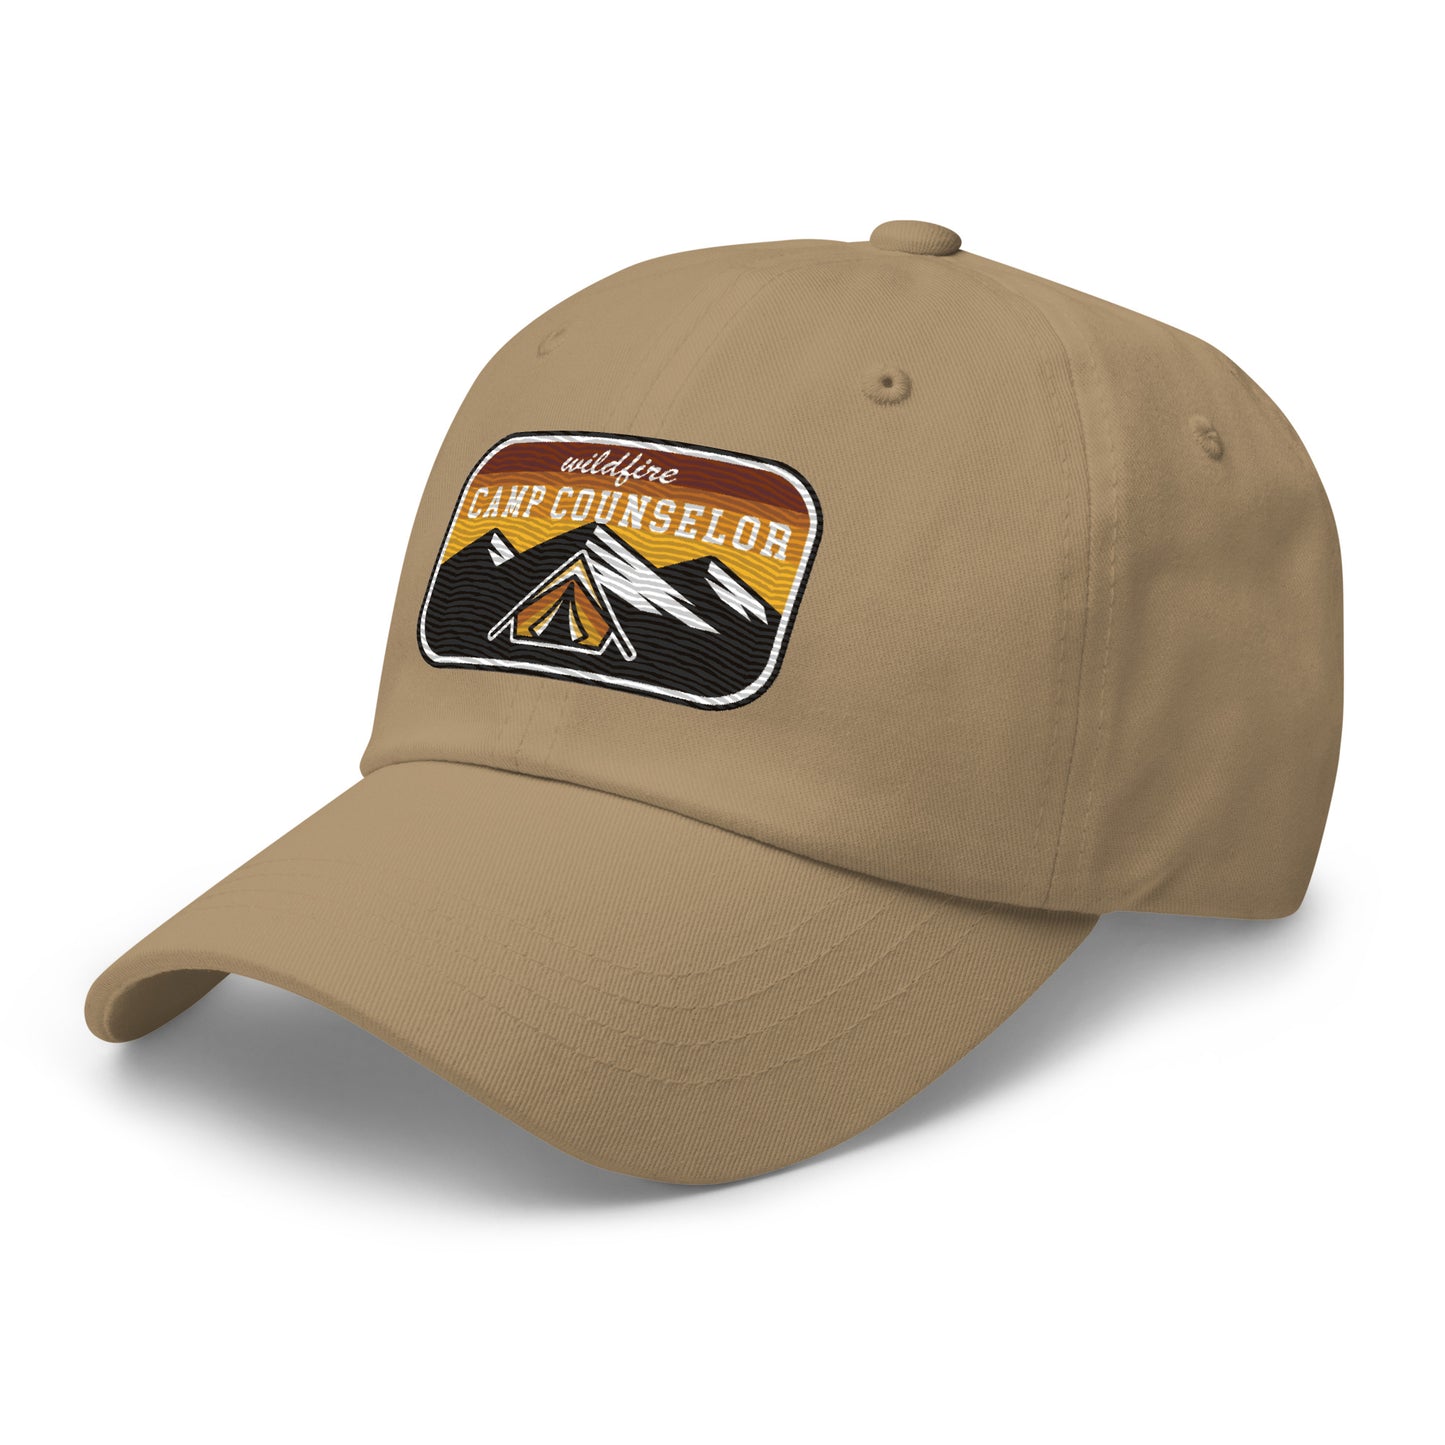 Wildfire Cigars embroidered khaki dad hat facing the front left